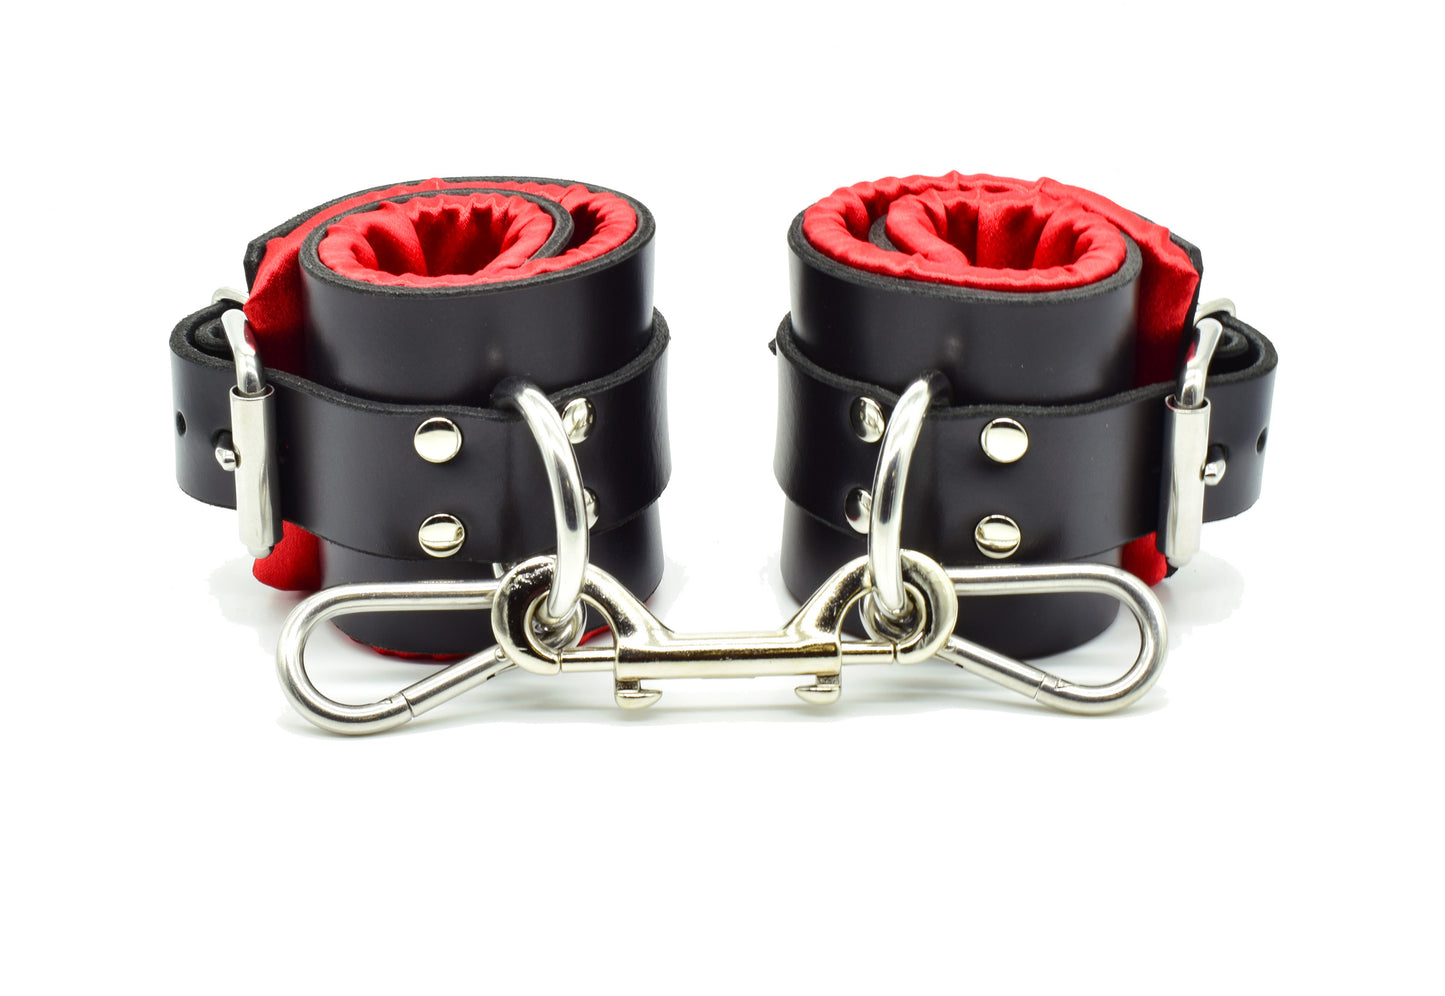 Red satin lined bondage cuffs with double snap clip connecting the cuffs.